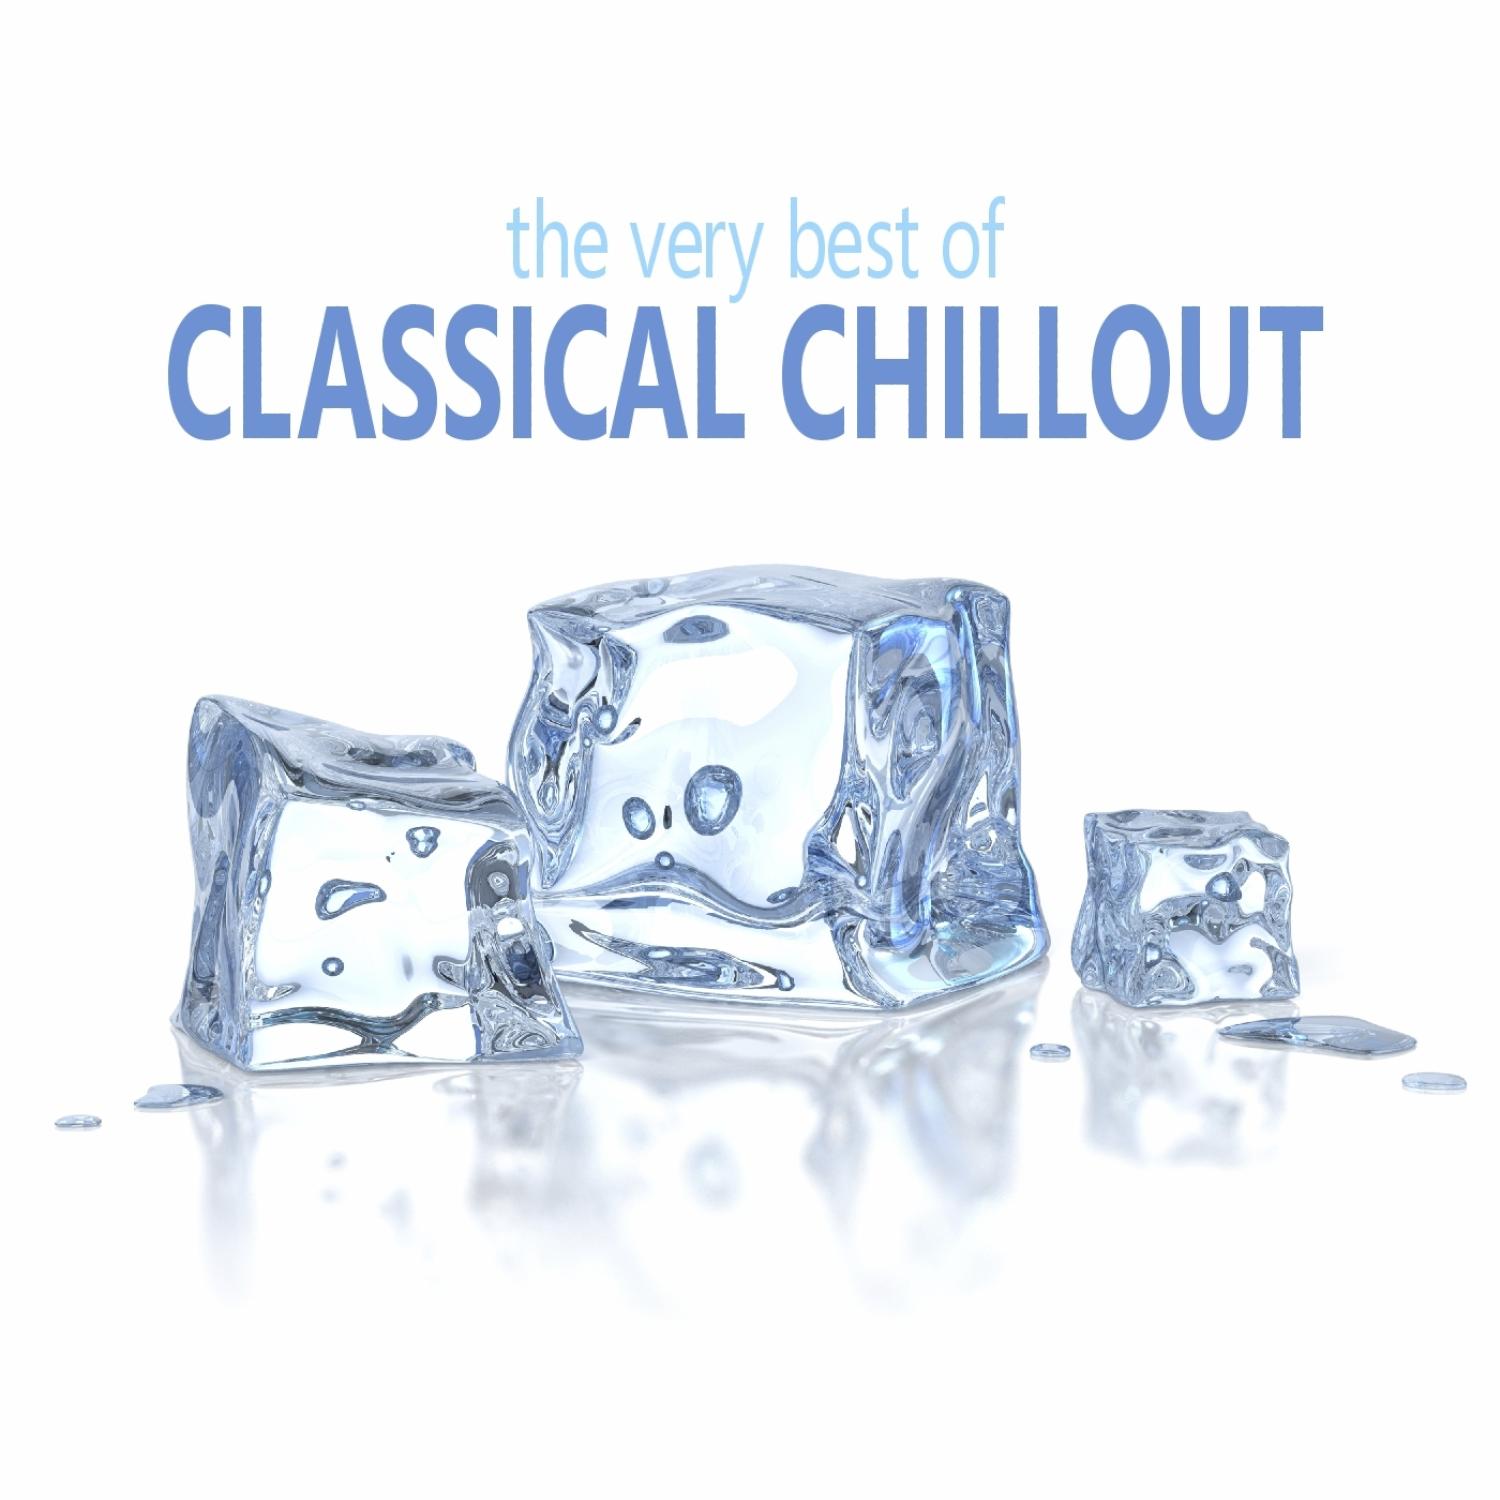 The Very Best of Classical Chillout